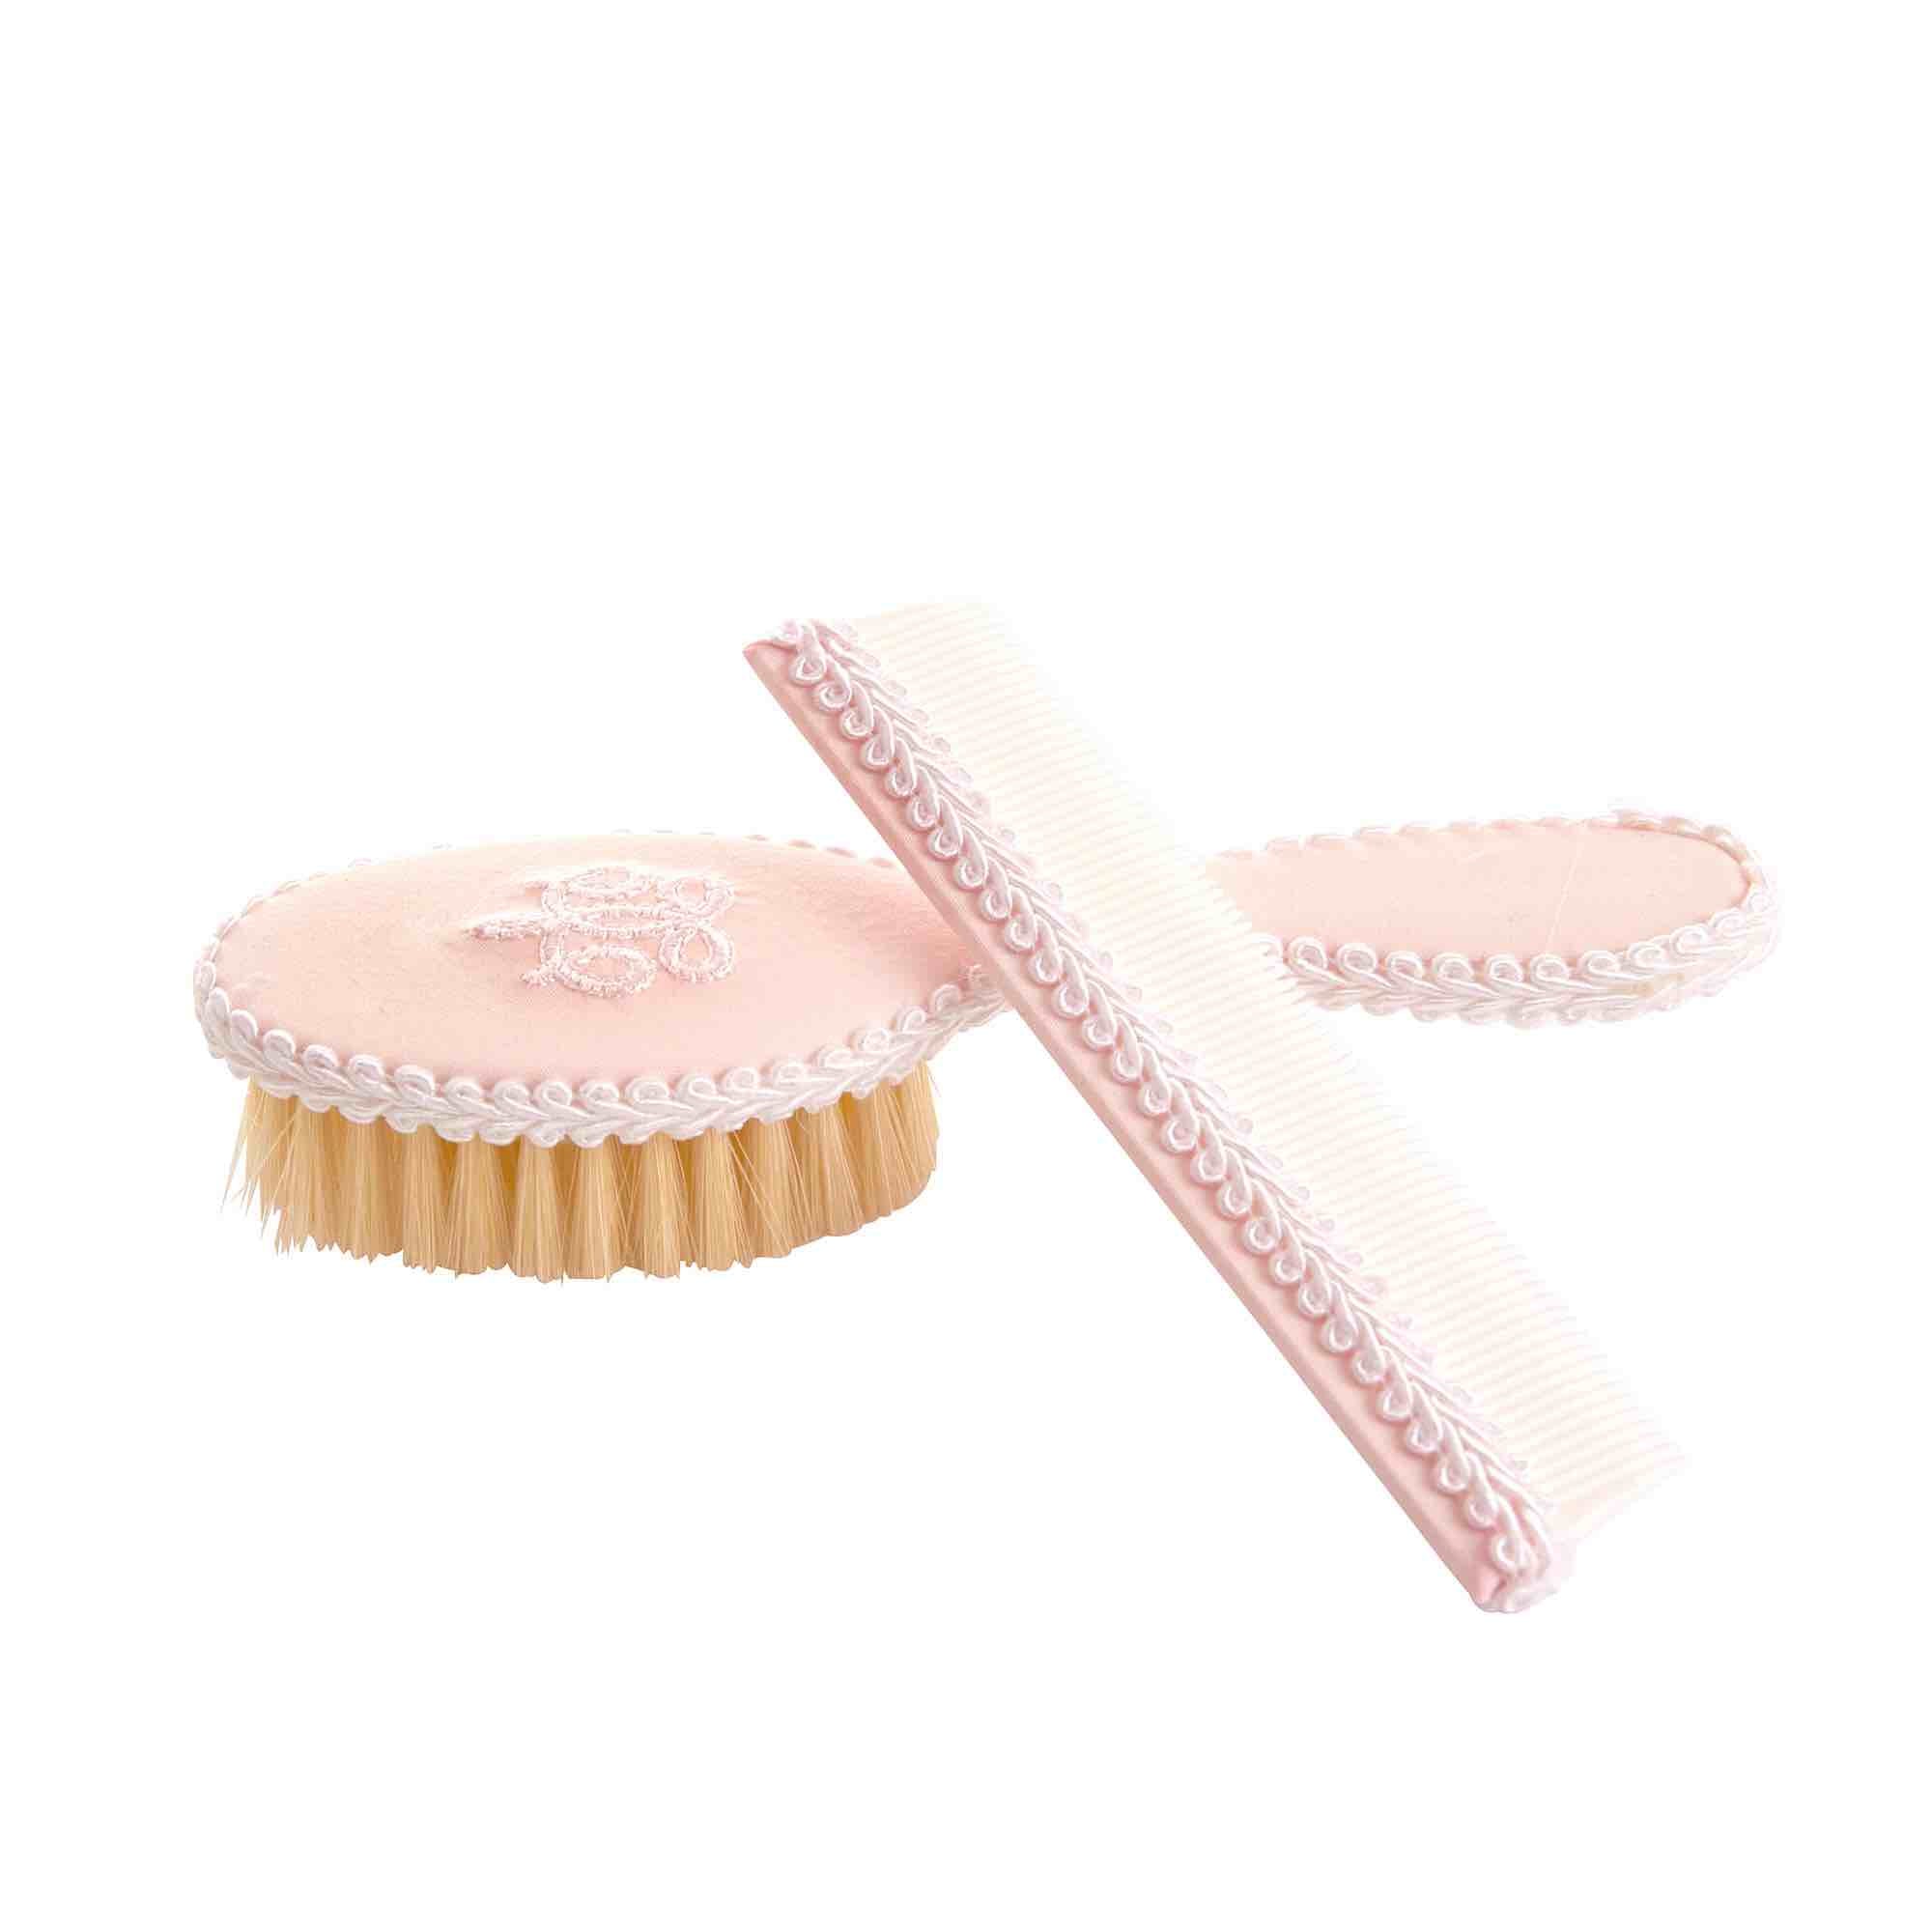 Theophile & Patachou Brush & Comb - Royal Pink